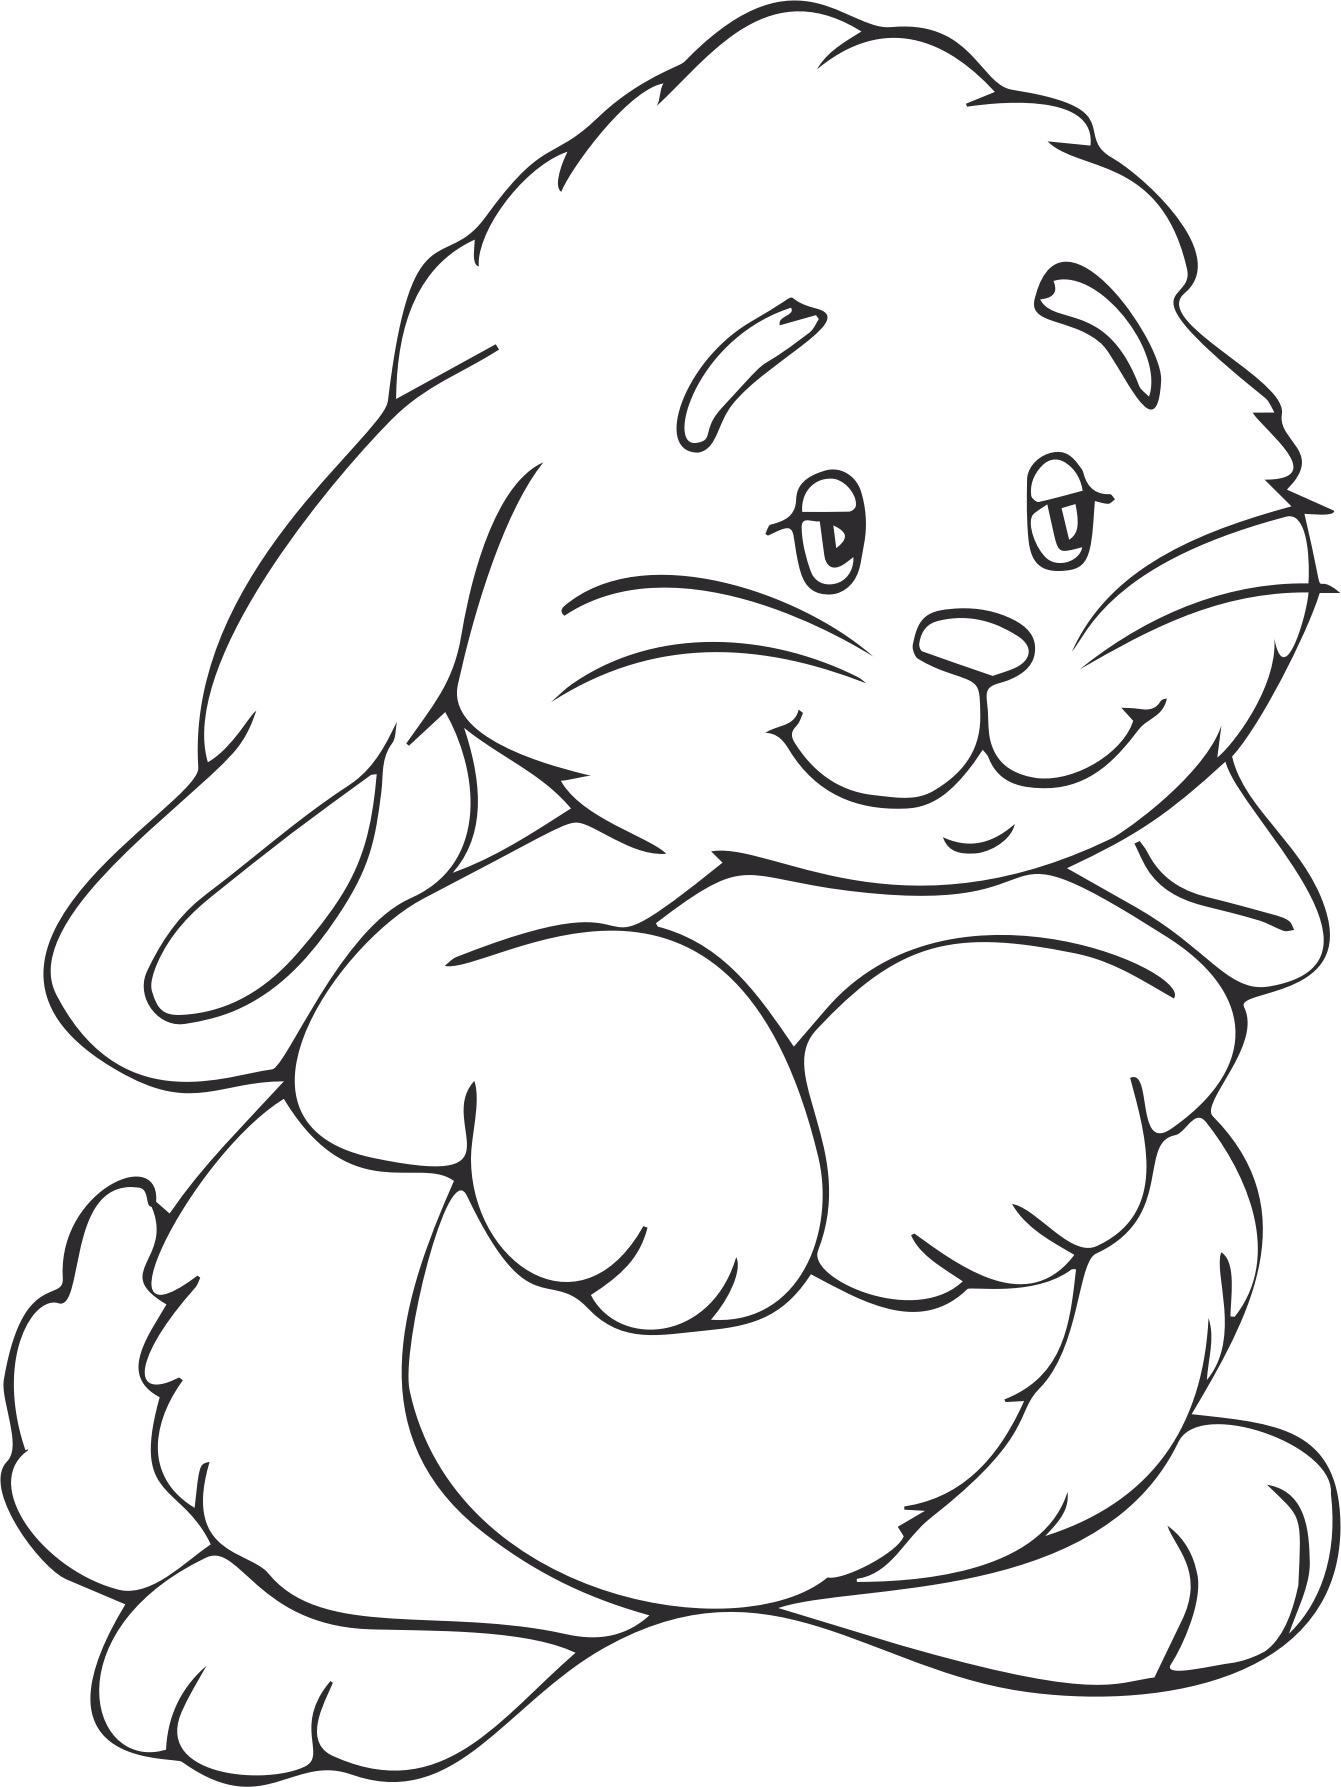 bunny-outline-drawing-at-getdrawings-free-download